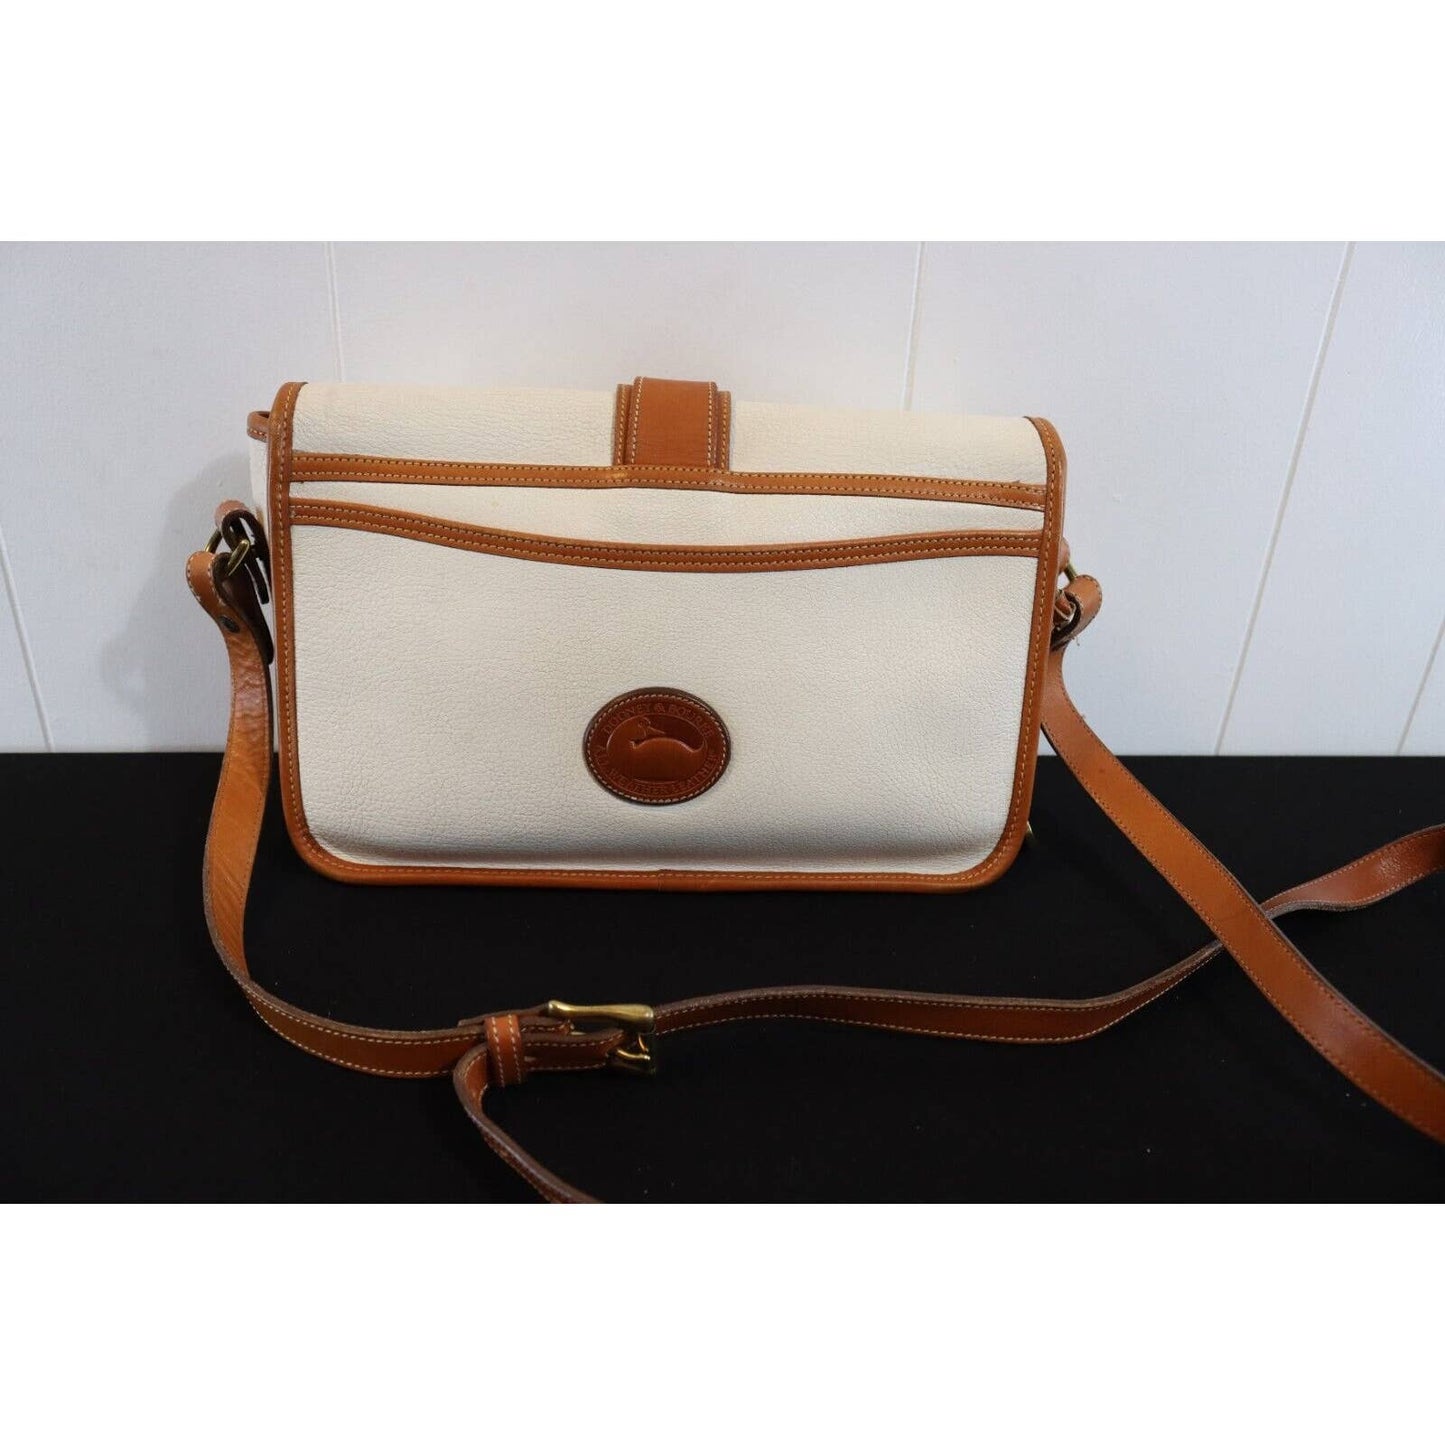 Vintage Dooney & Bourke White All Weather Leather Equestrian Crossbody Bag